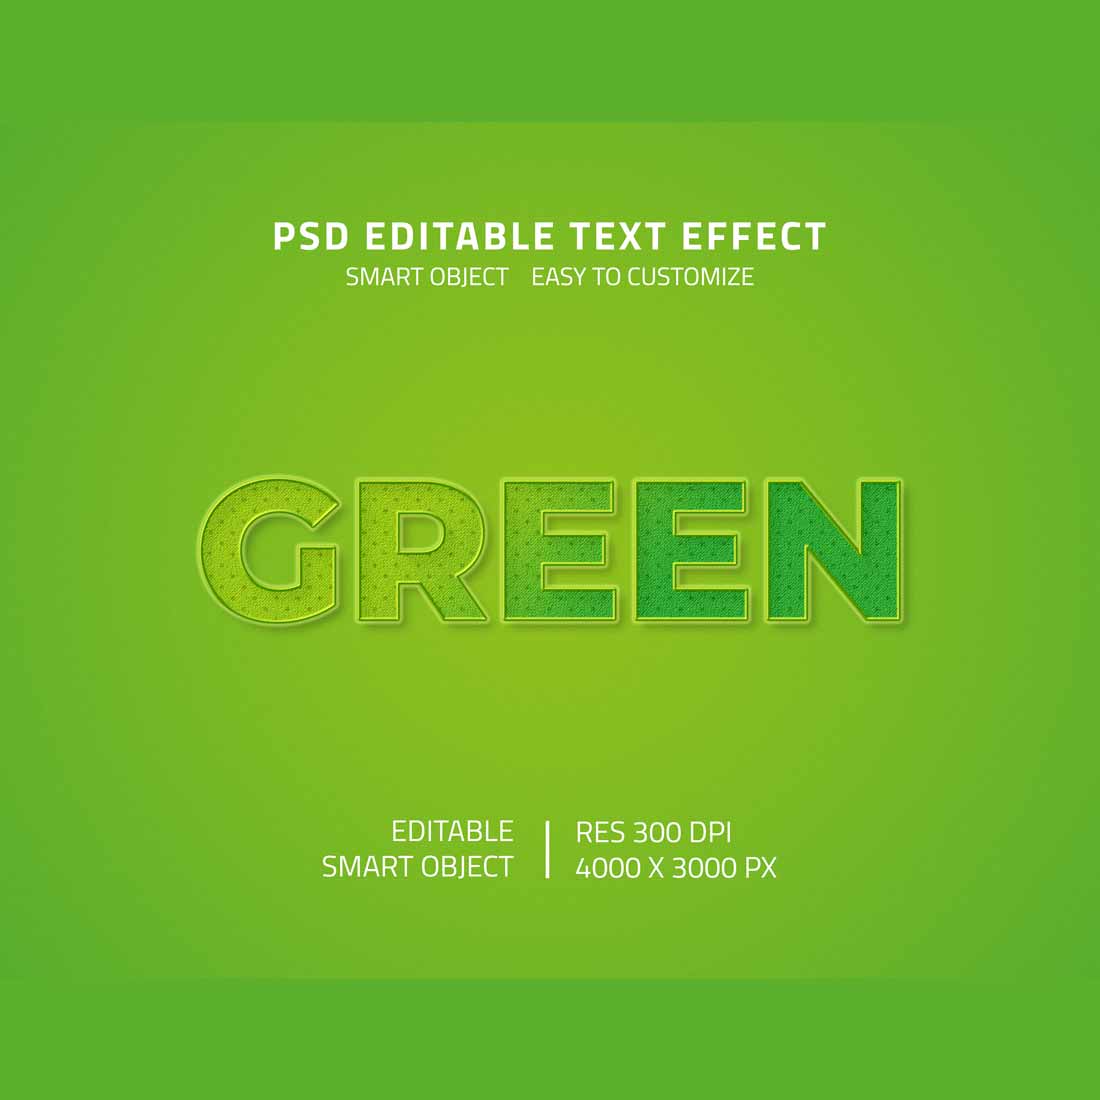 Green Psd Text Effect cover image.